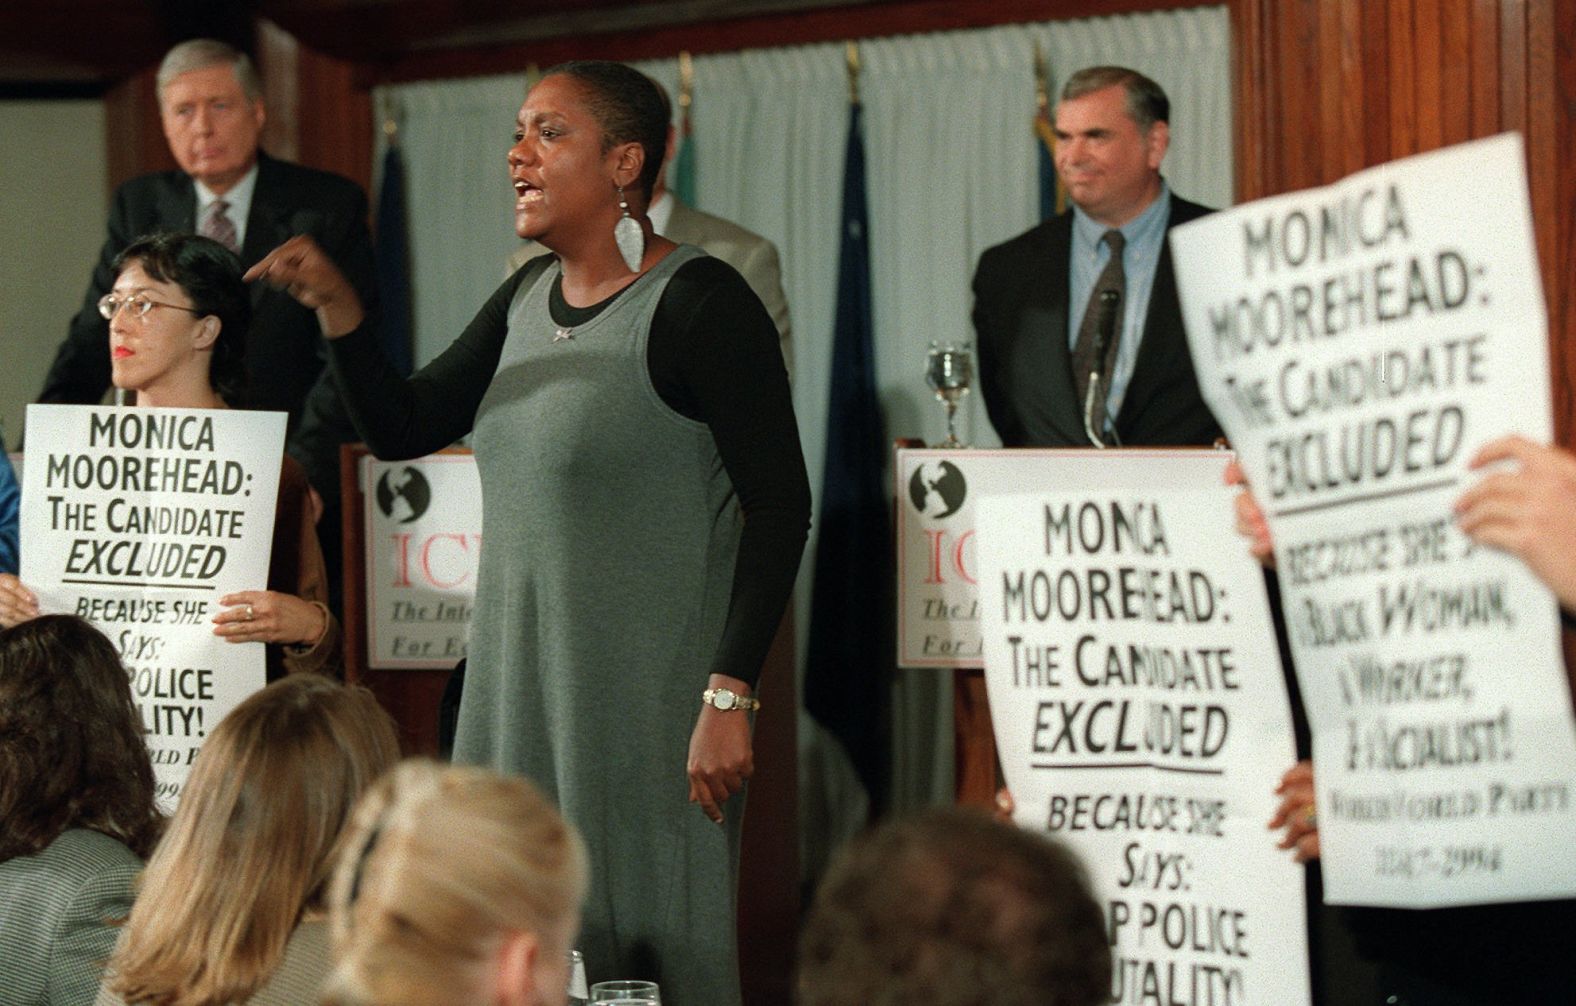 Monica Moorehead, a presidential candidate from the Workers World Party, disrupts a presidential debate in Washington, DC, in 1996. She and her supporters walked in front of the participants and complained about her exclusion.